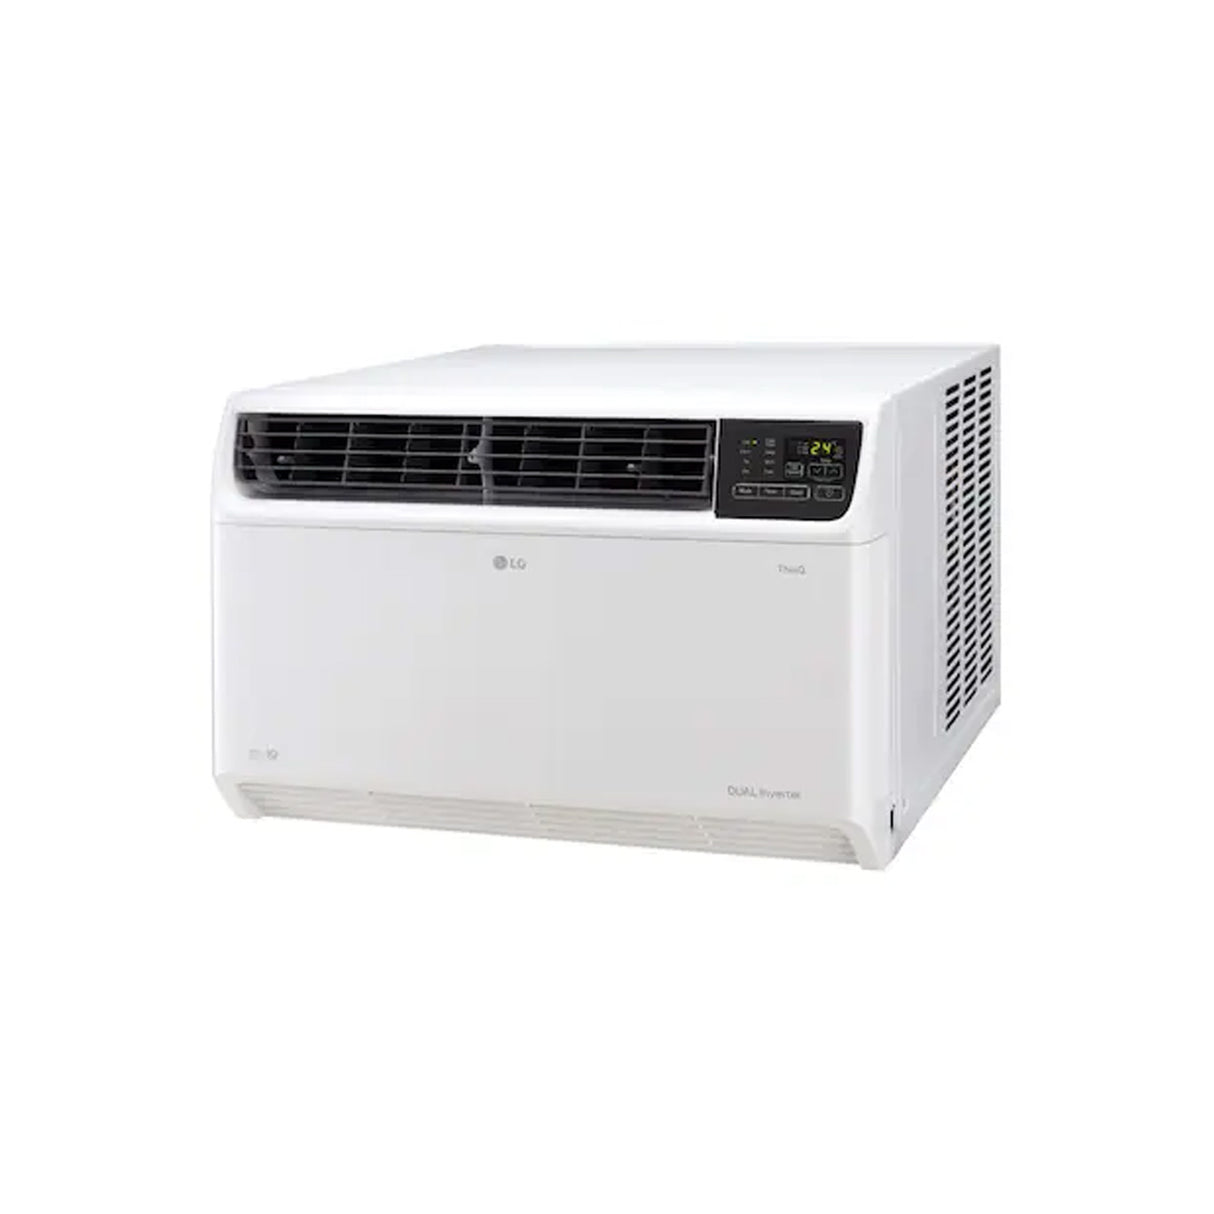 Best Air Conditioner: LG 1.5 Ton 5-Star Window AC - Advanced Cooling Technology